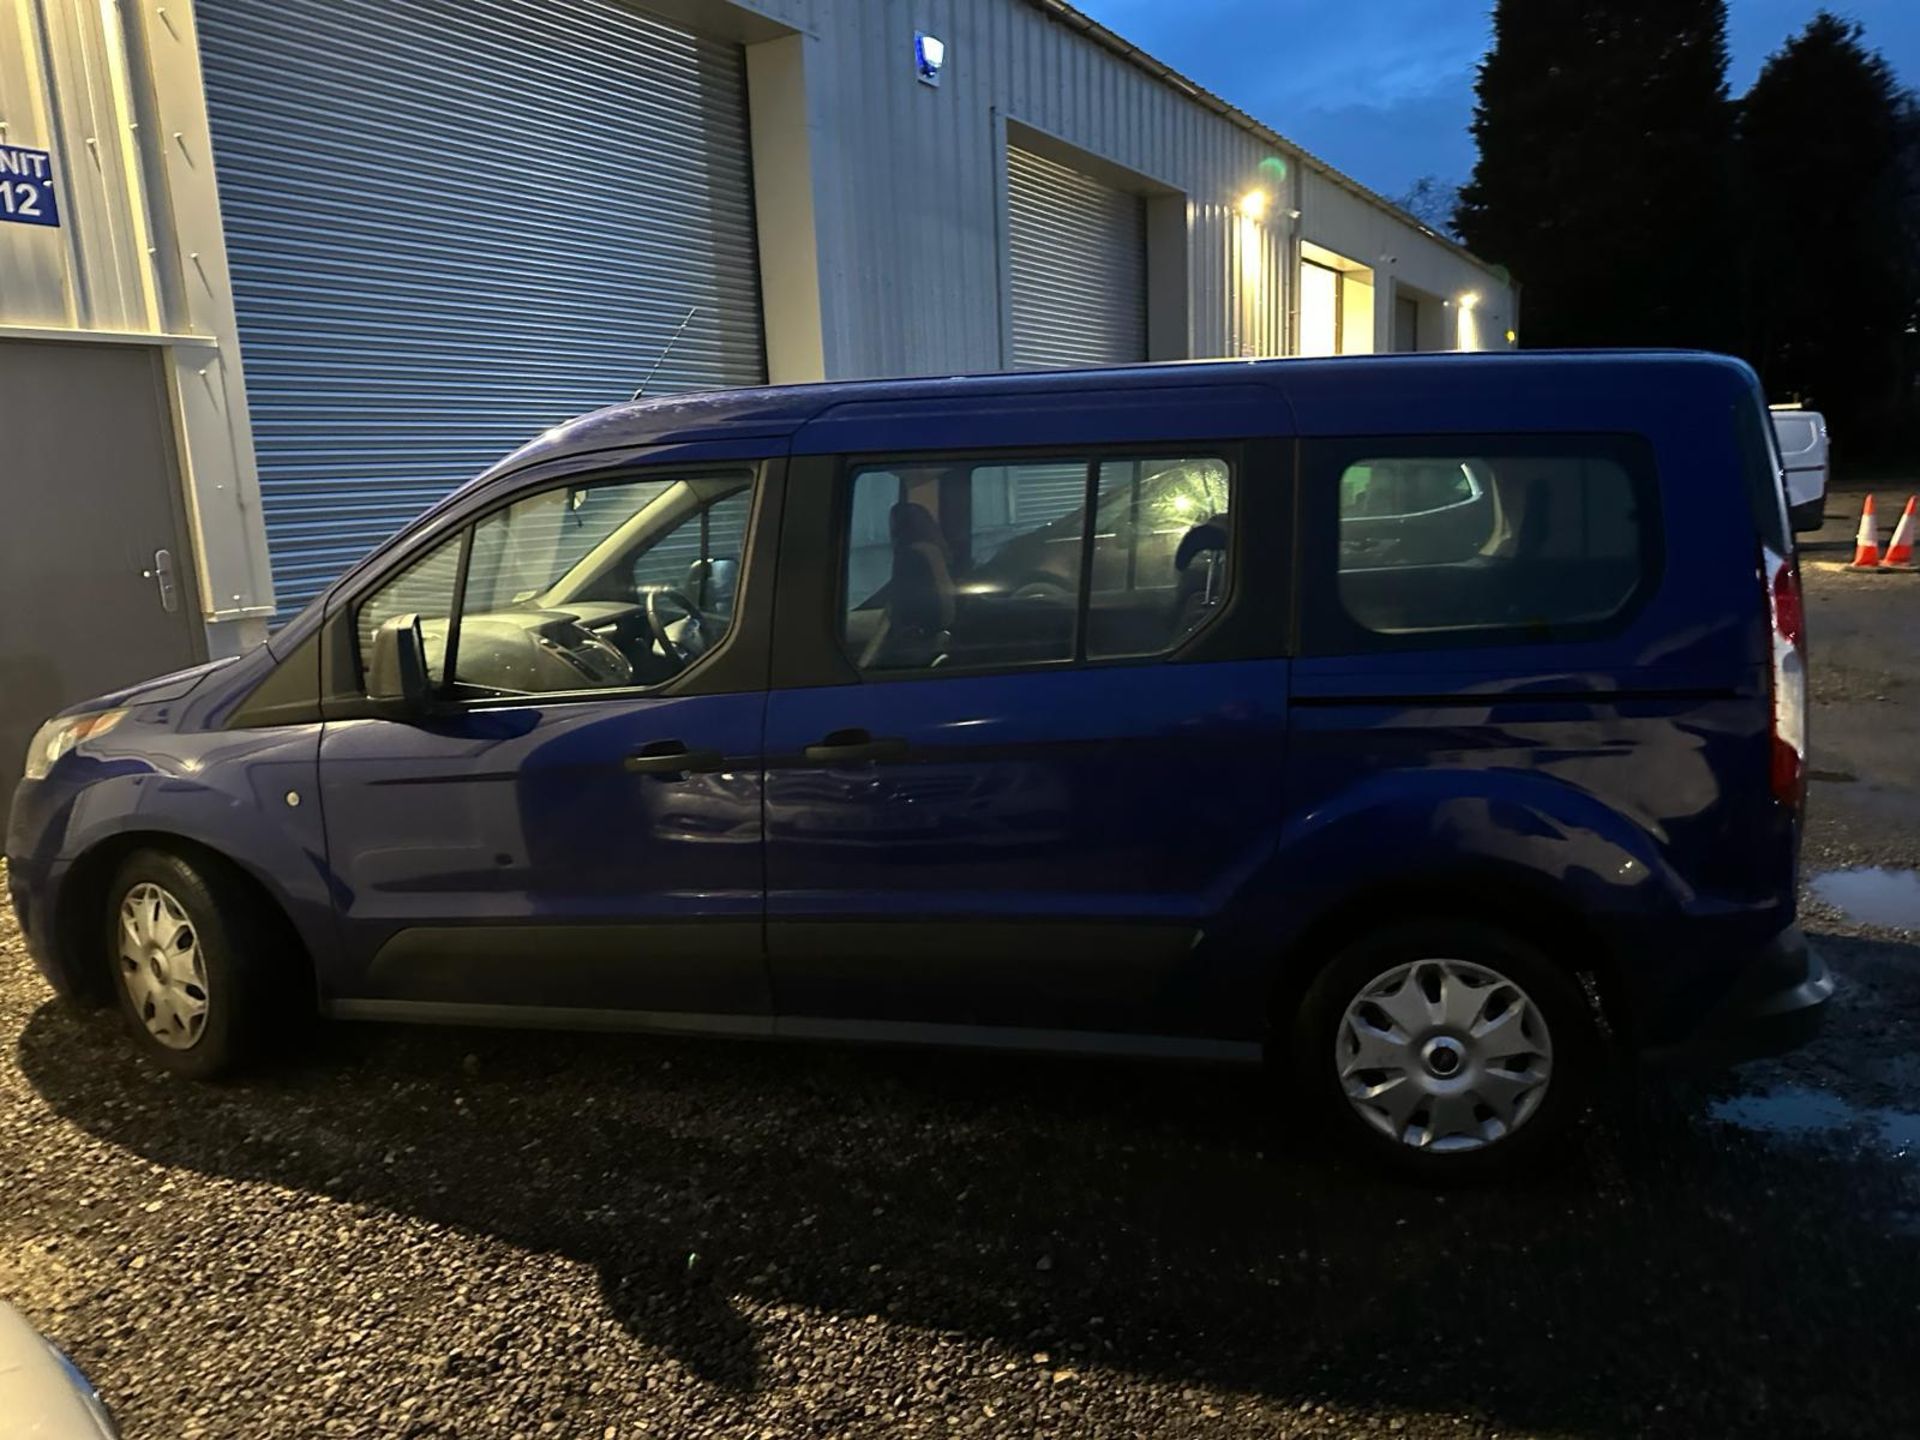 2017 17 FORD TRANSIT CONNECT TOURNEO VAN - 196K MILES - EURO 6 - NO DRIVE - Image 5 of 8